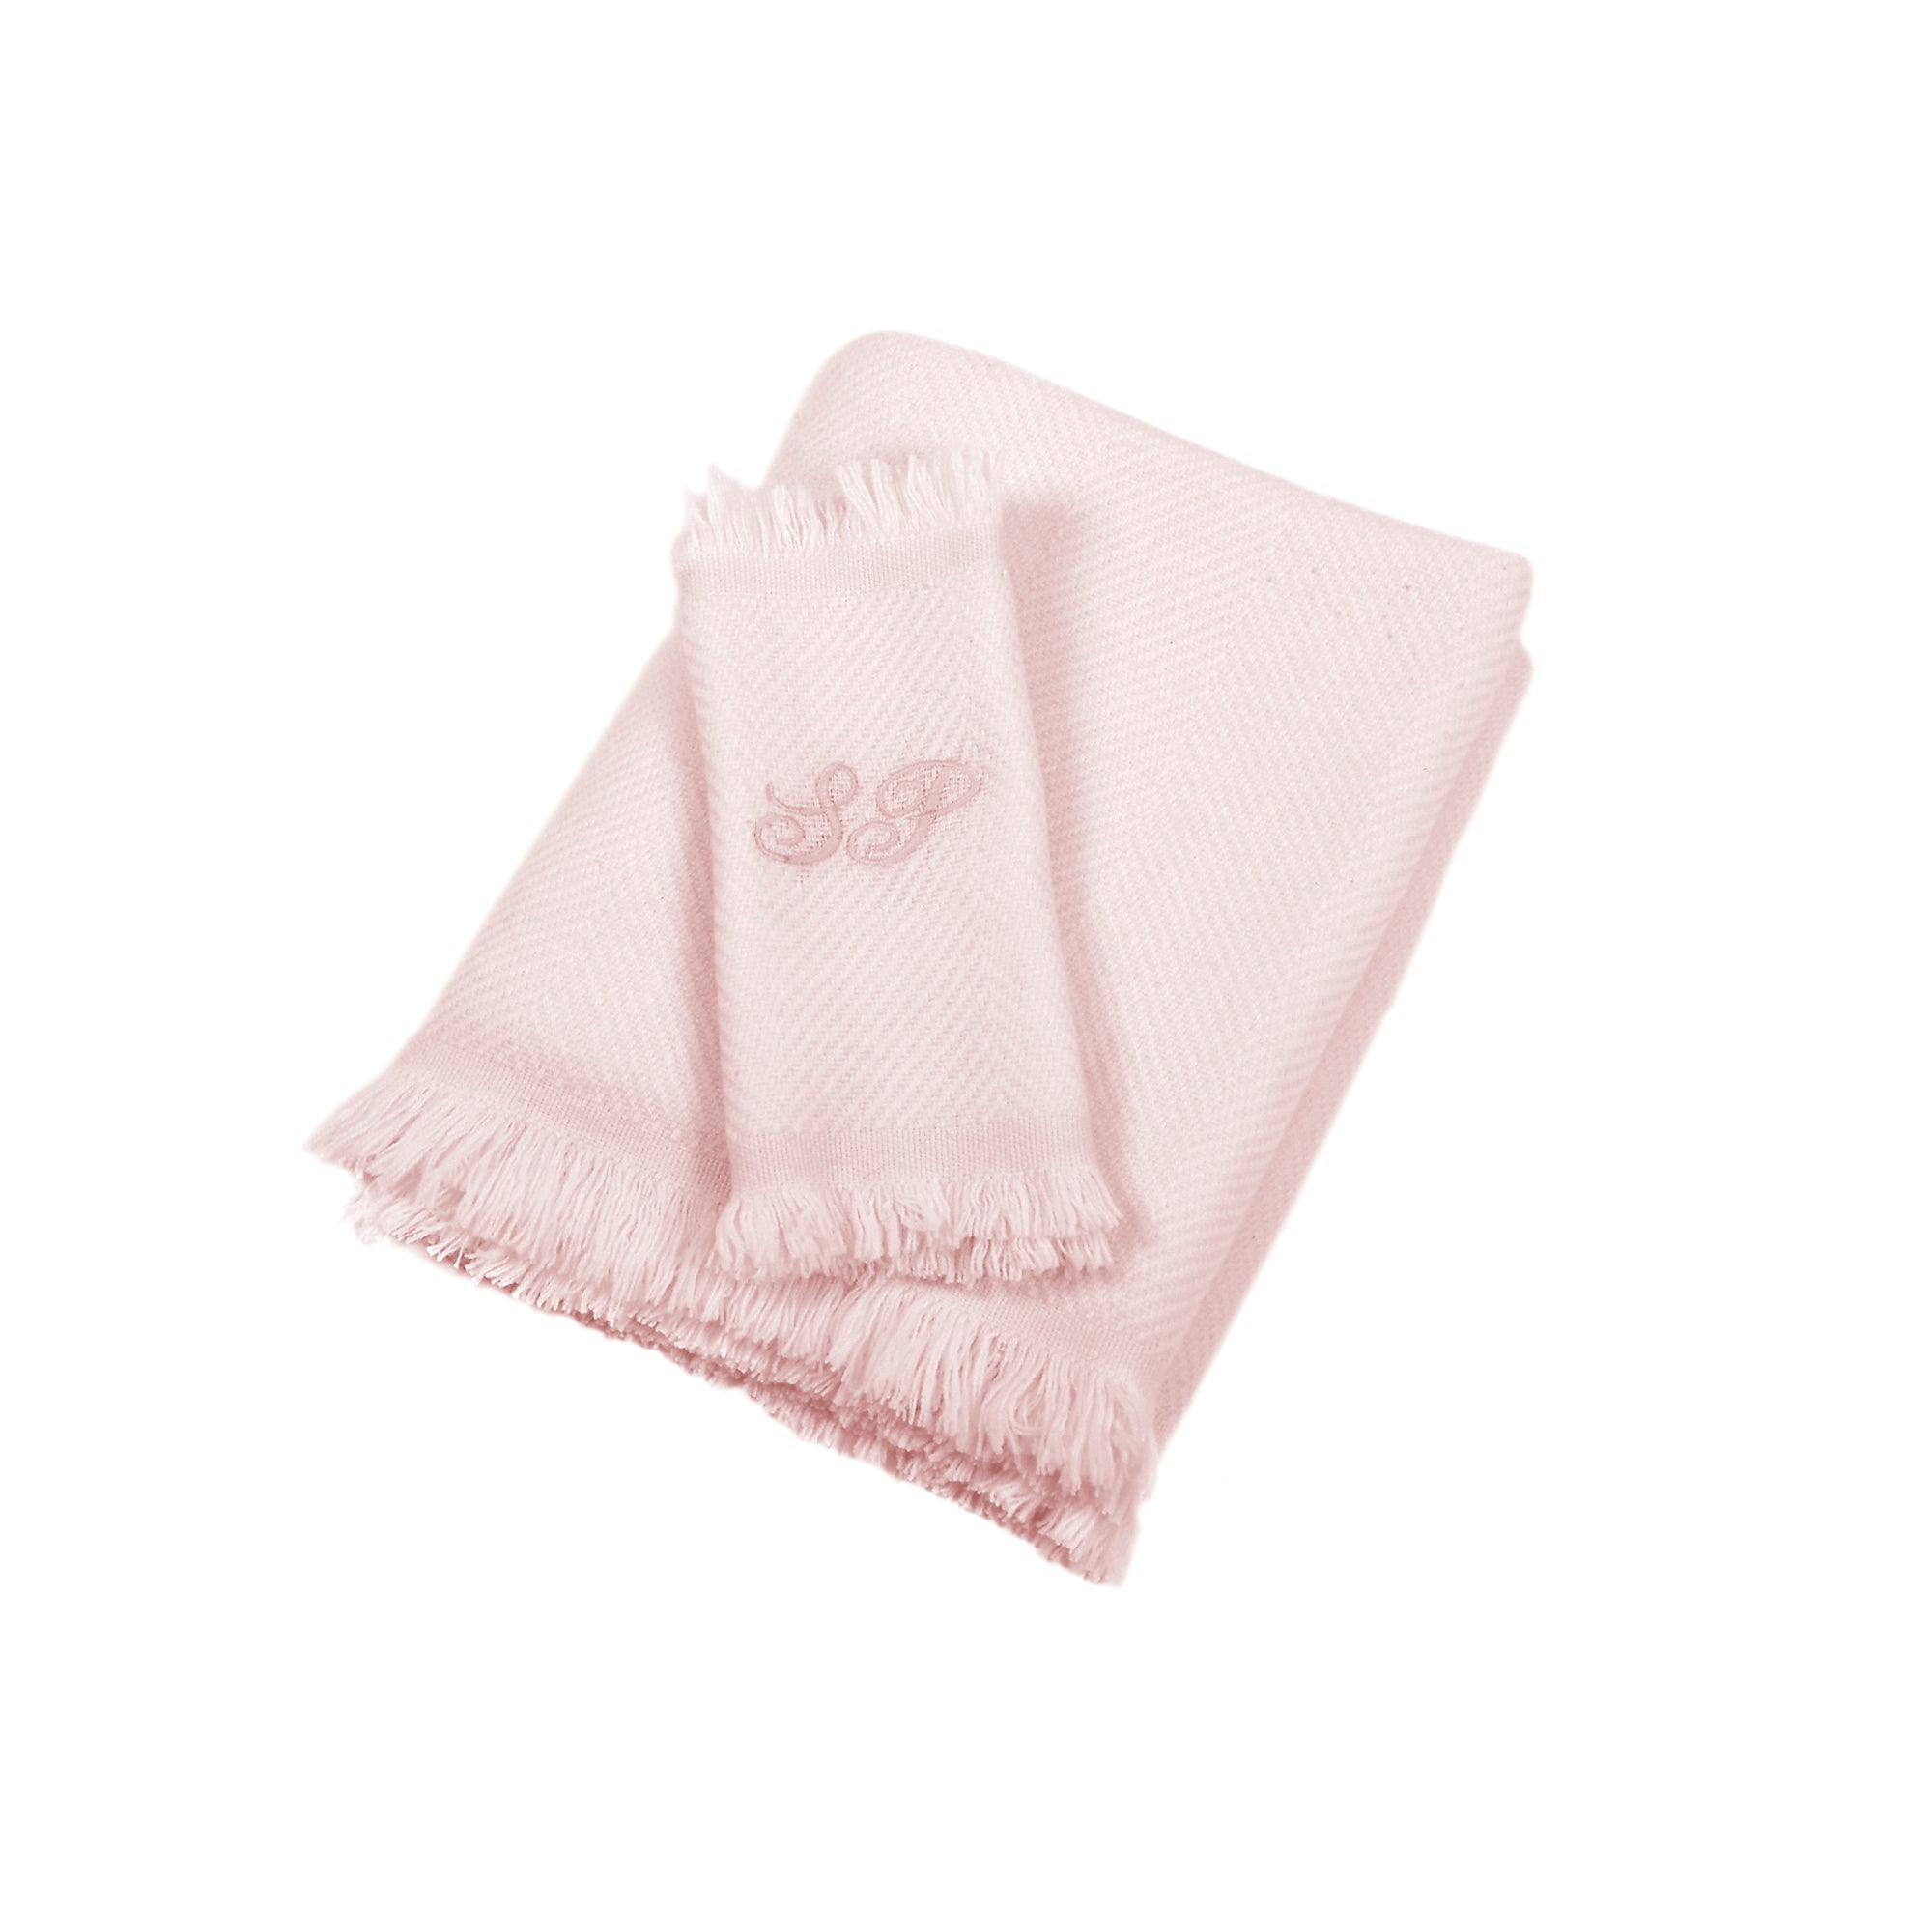 Cream and Soft Pink 100% Cashmere Baby Blanket with short fringes - Alternative view 2